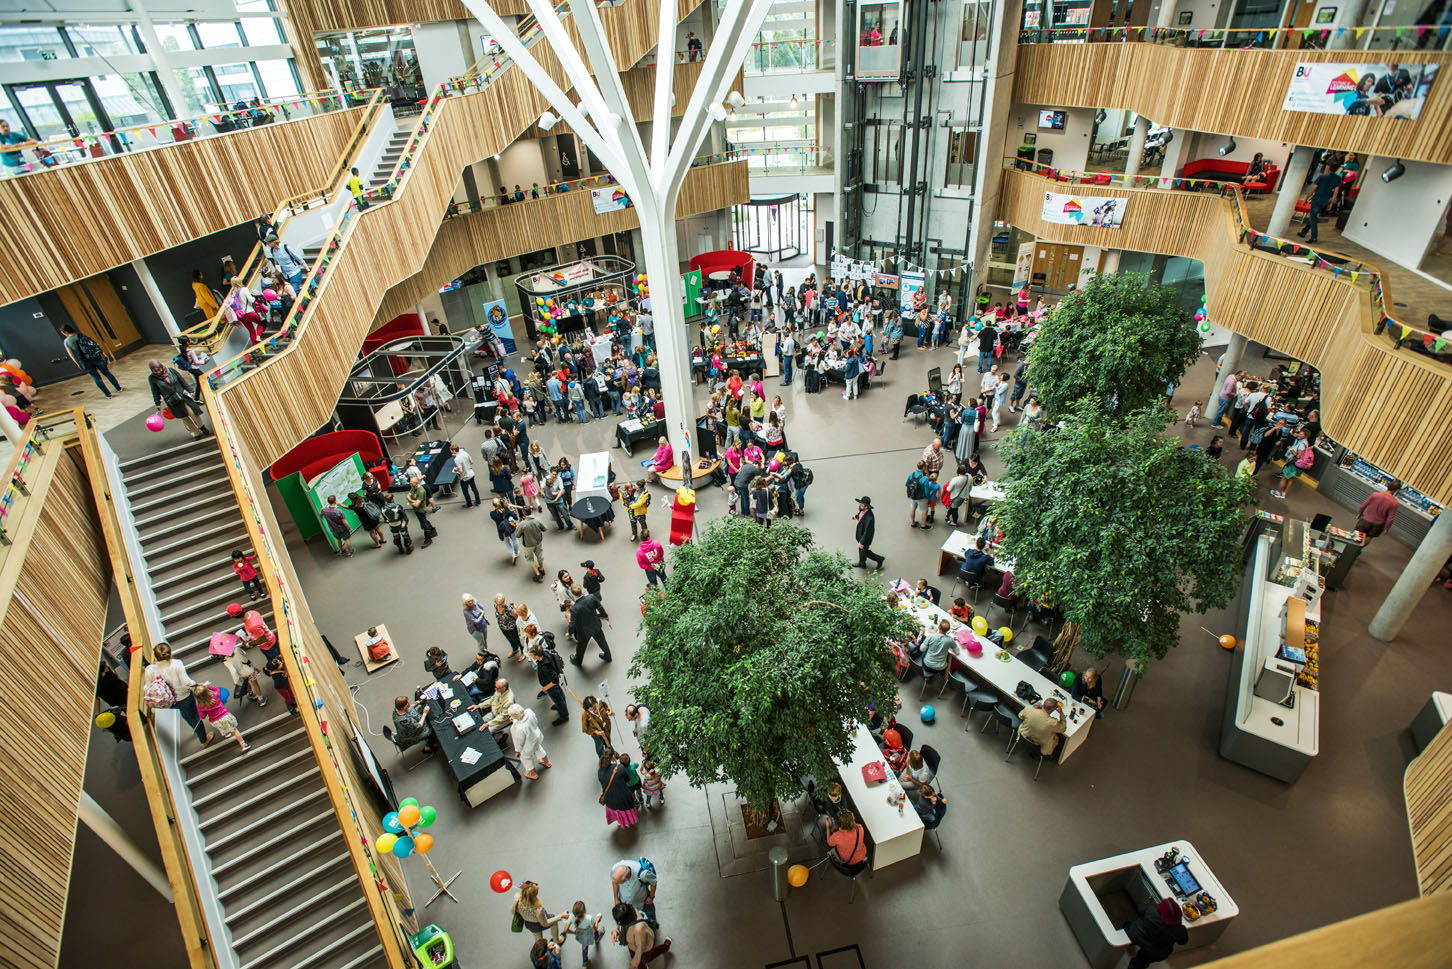 Crowds of people inside the Fusion Building during the Festival of Learning